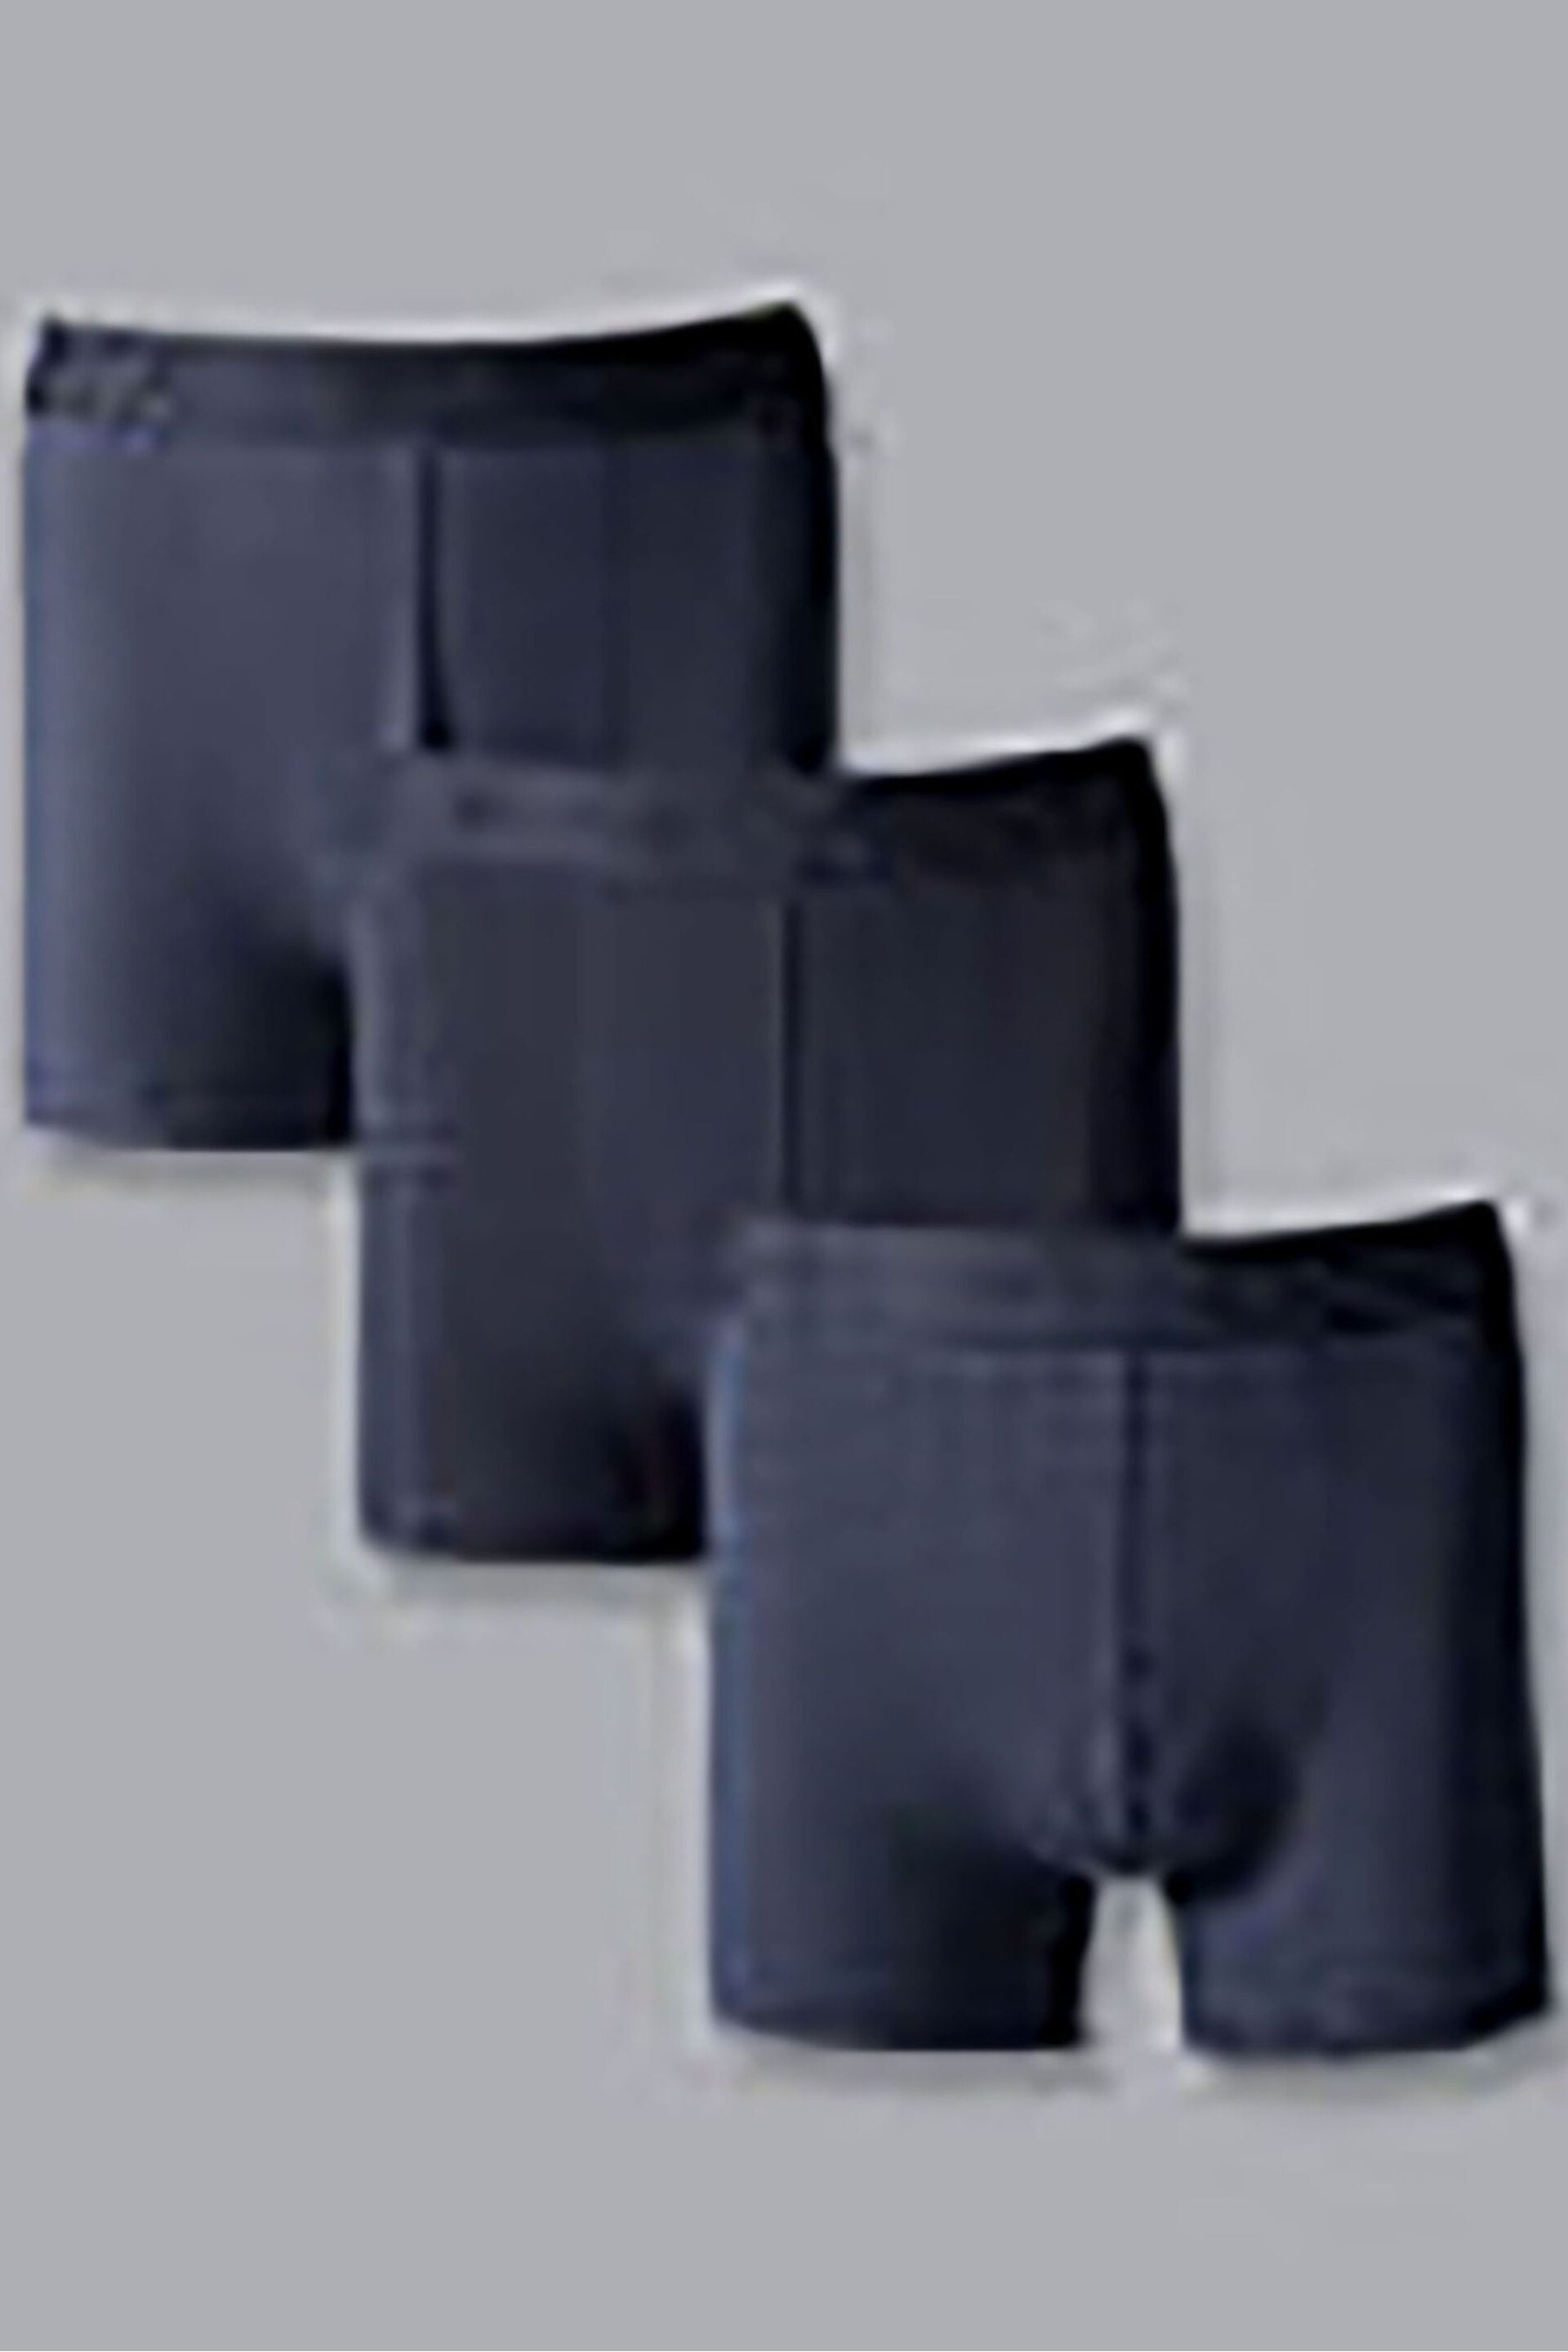 Charles Tyrwhitt Blue Cotton Stretch Jersey Trunks 3 Pack - Image 1 of 2